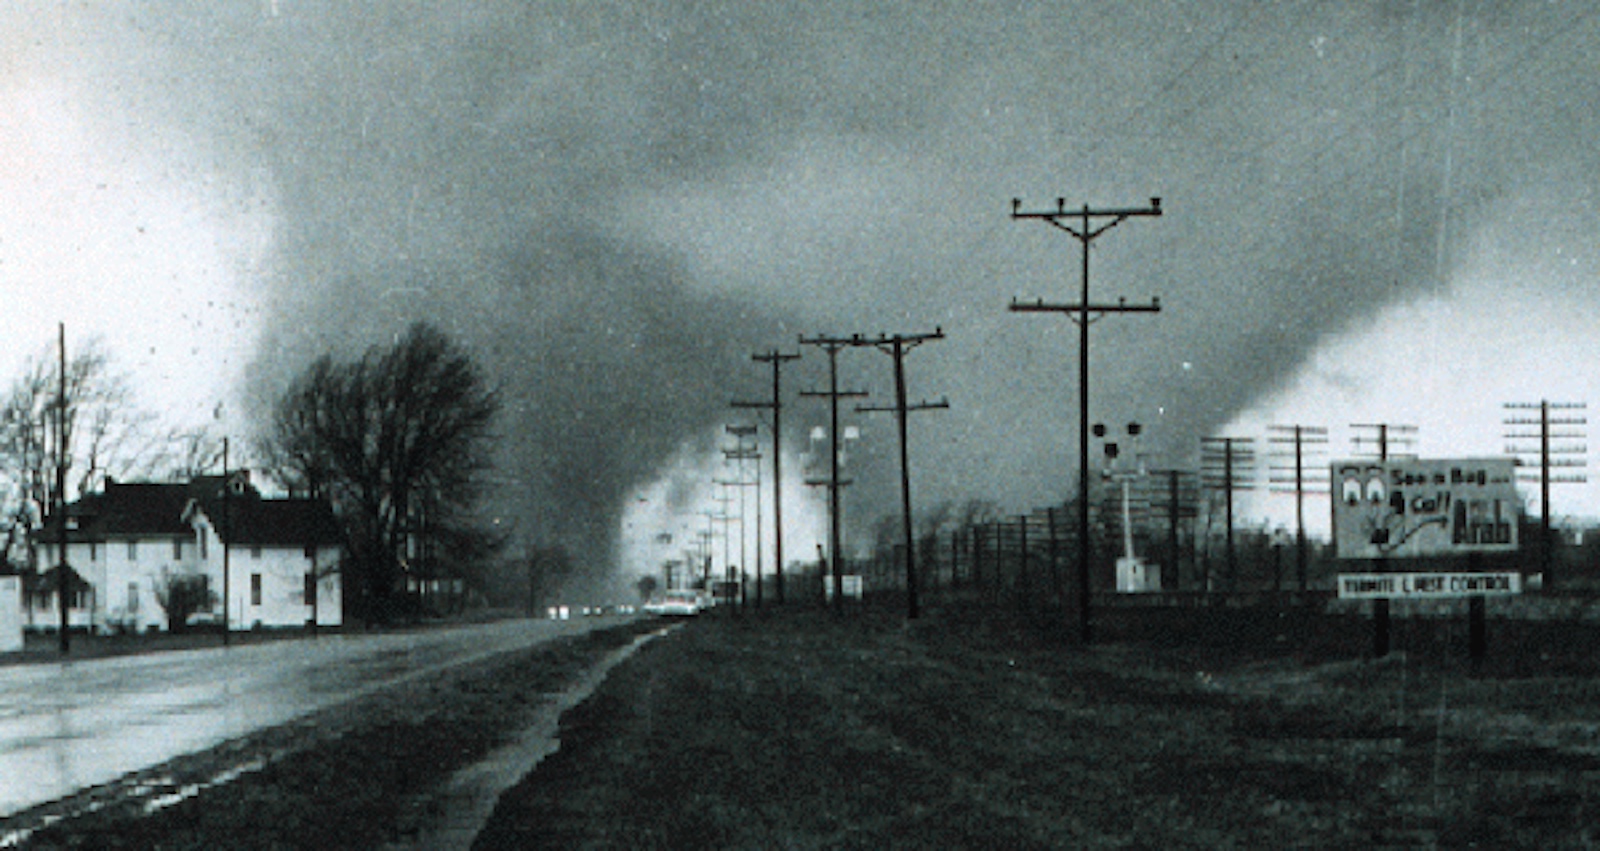 Image of a tornado pasing a town on a dark day